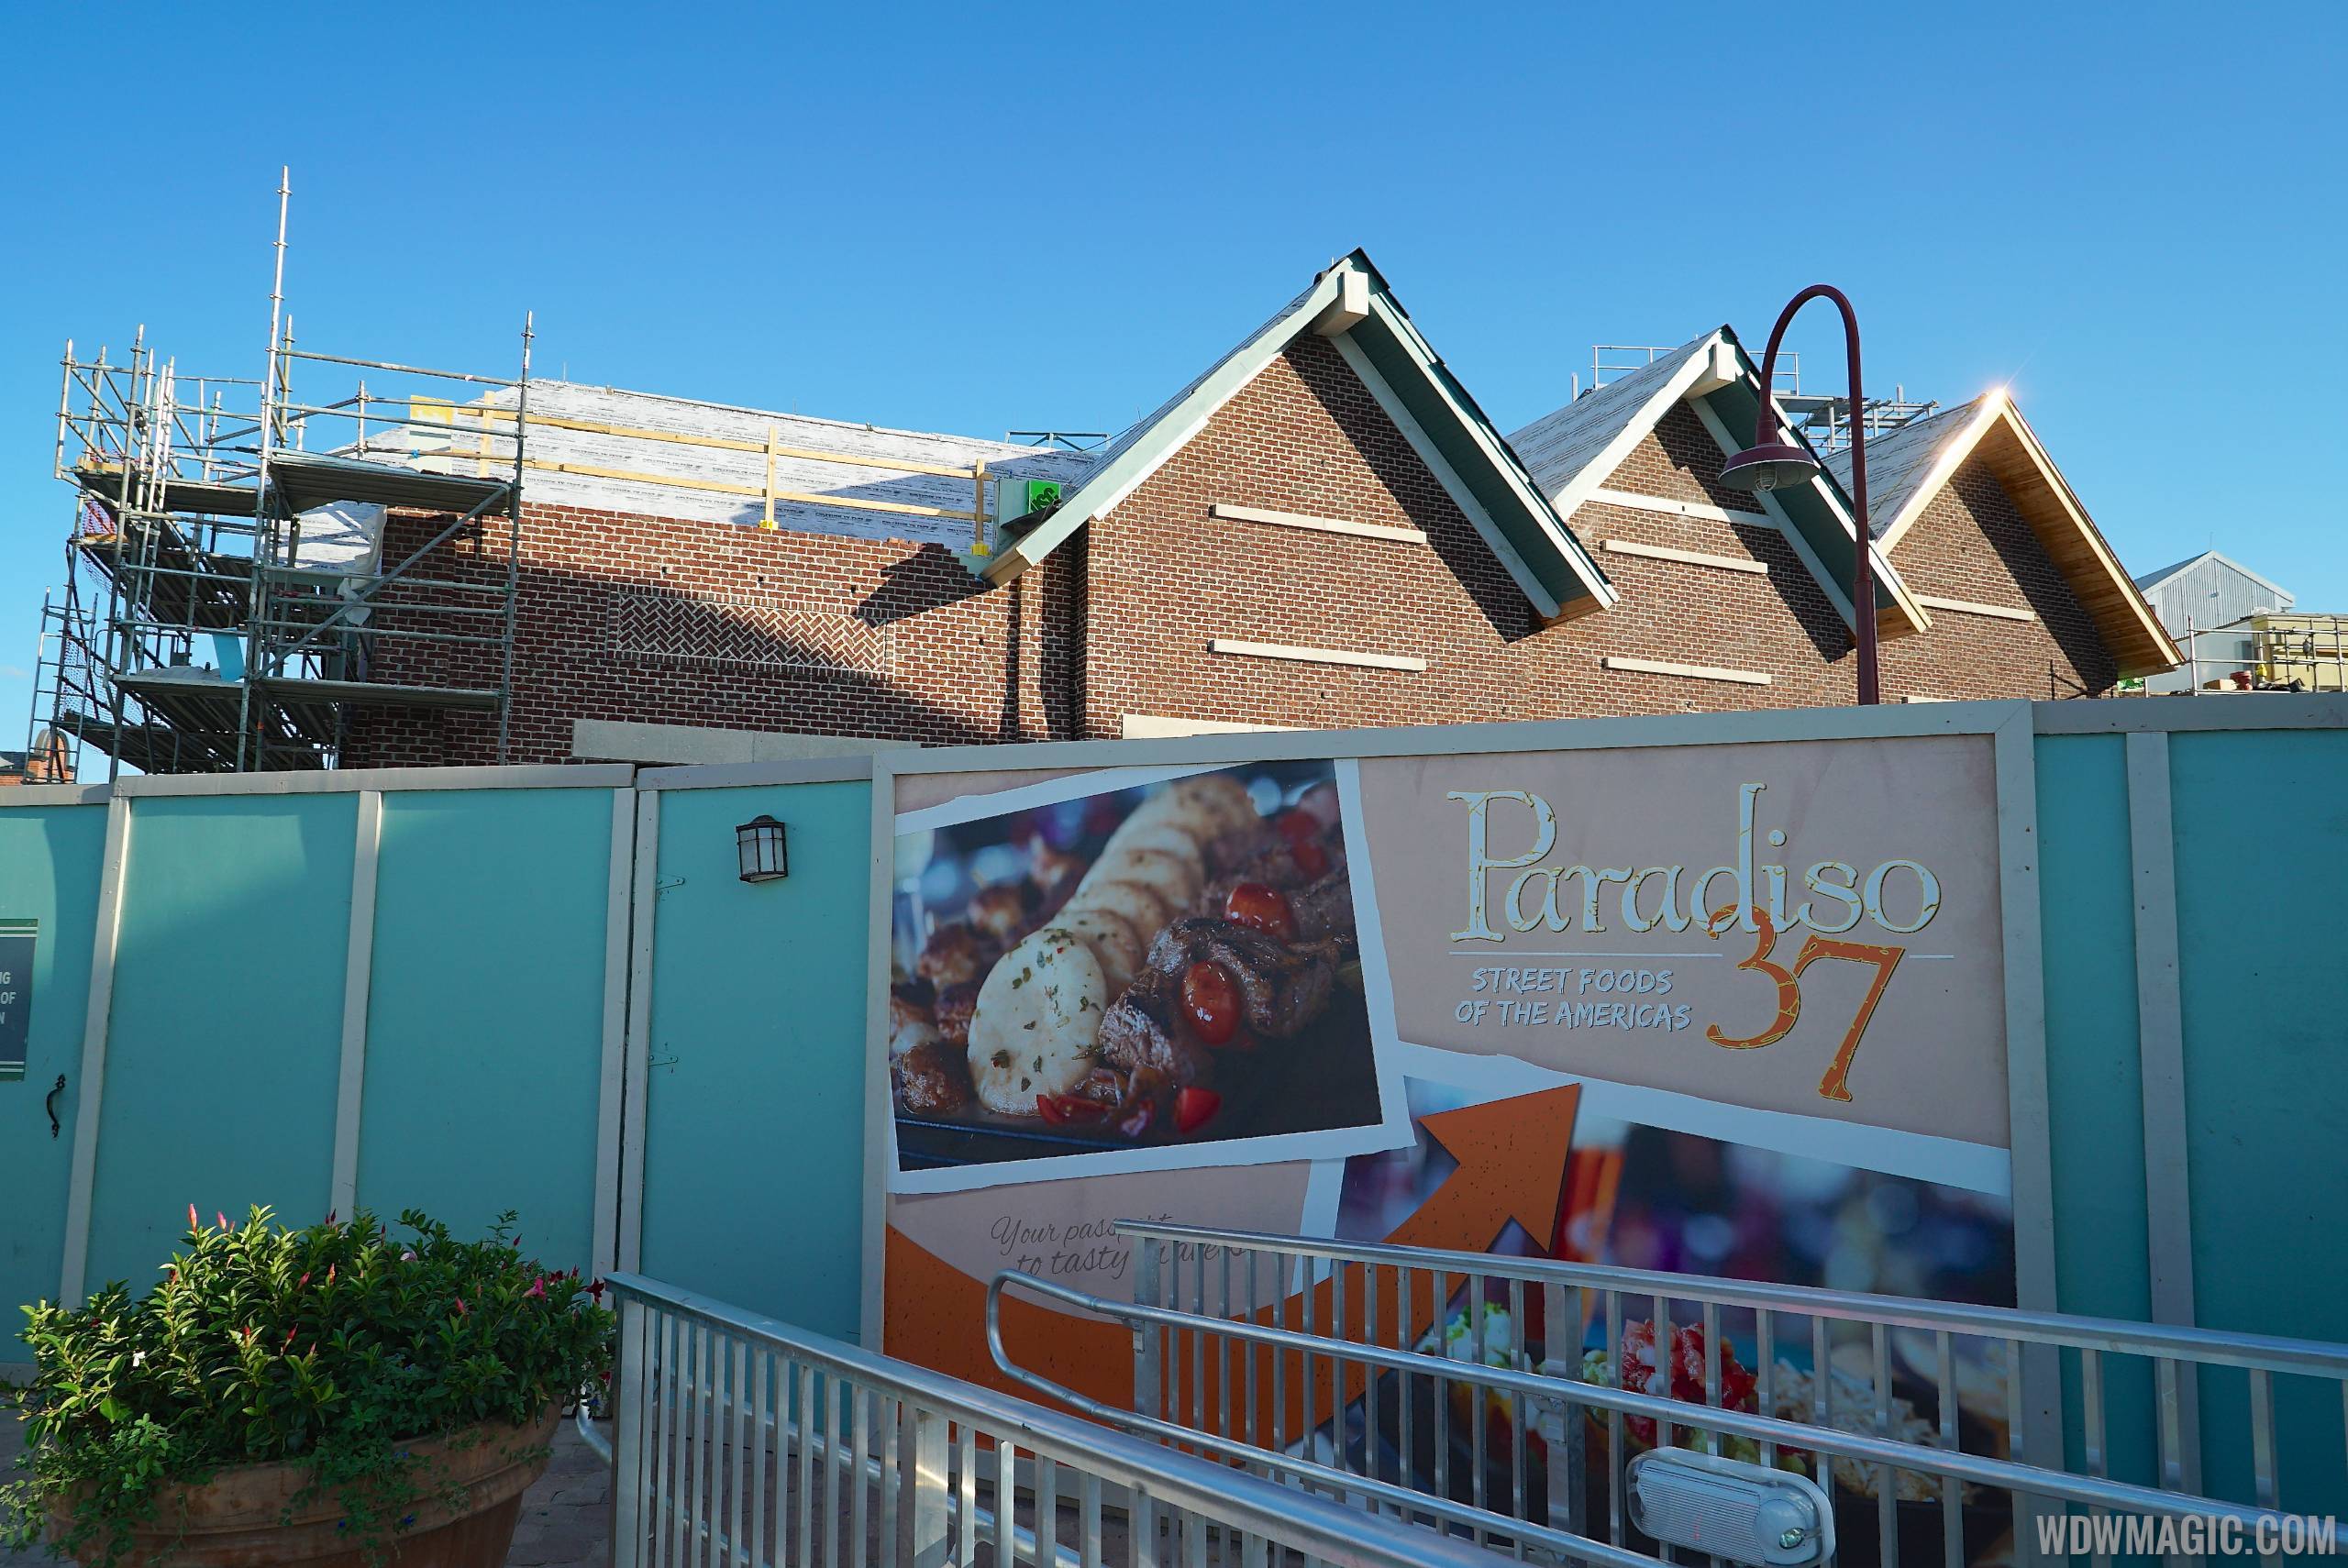 PHOTOS - A look at the new retail space at The Landing in Disney Springs